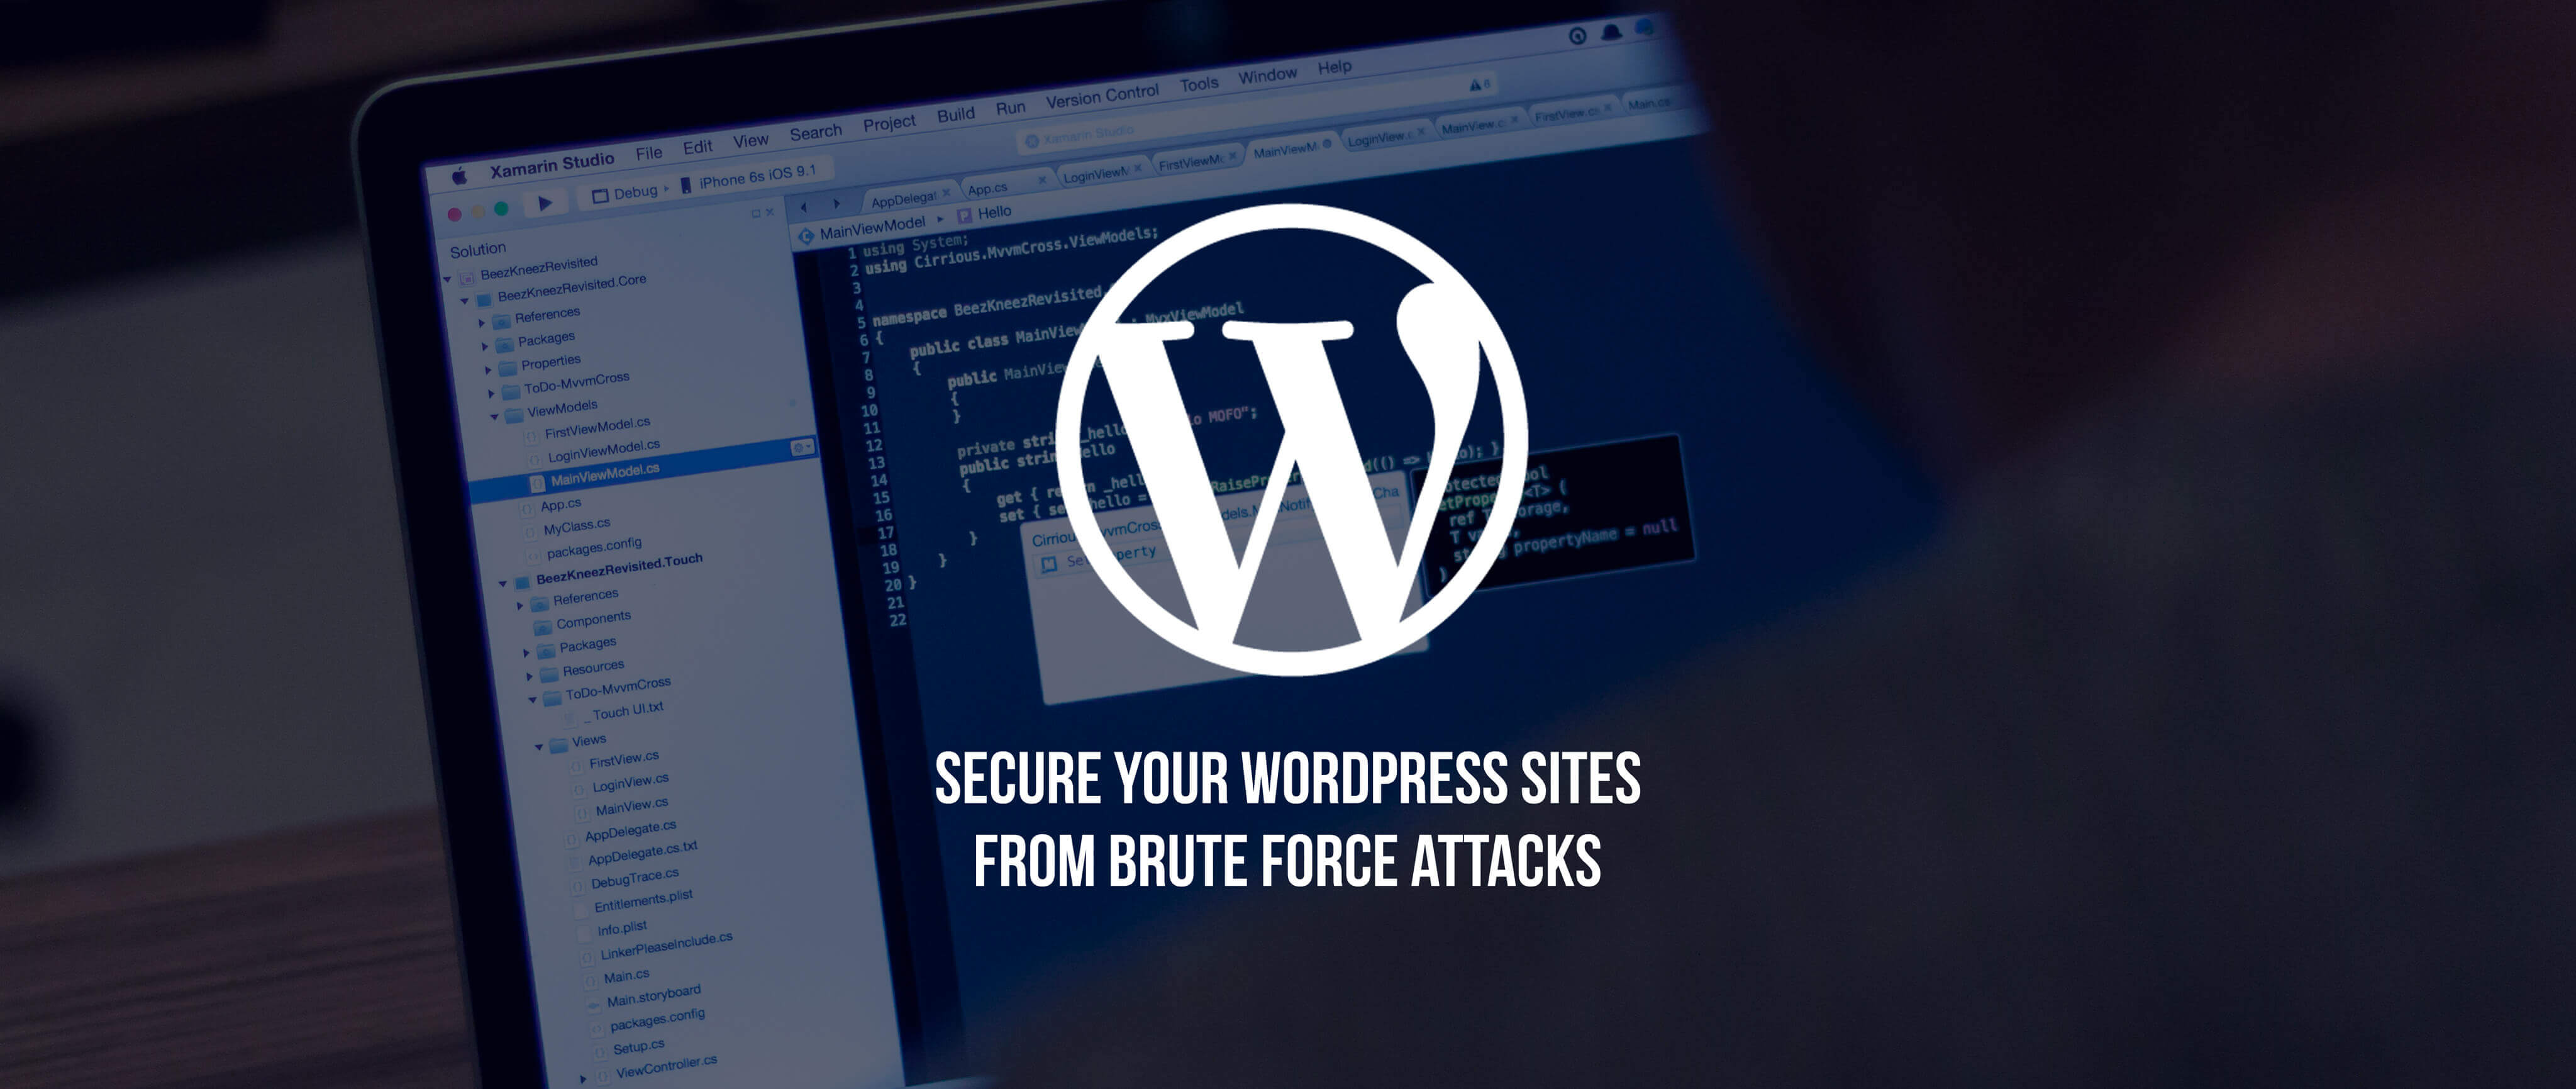 how-to-secure-wordpress-sites-from-brute-force-attacks.jpg